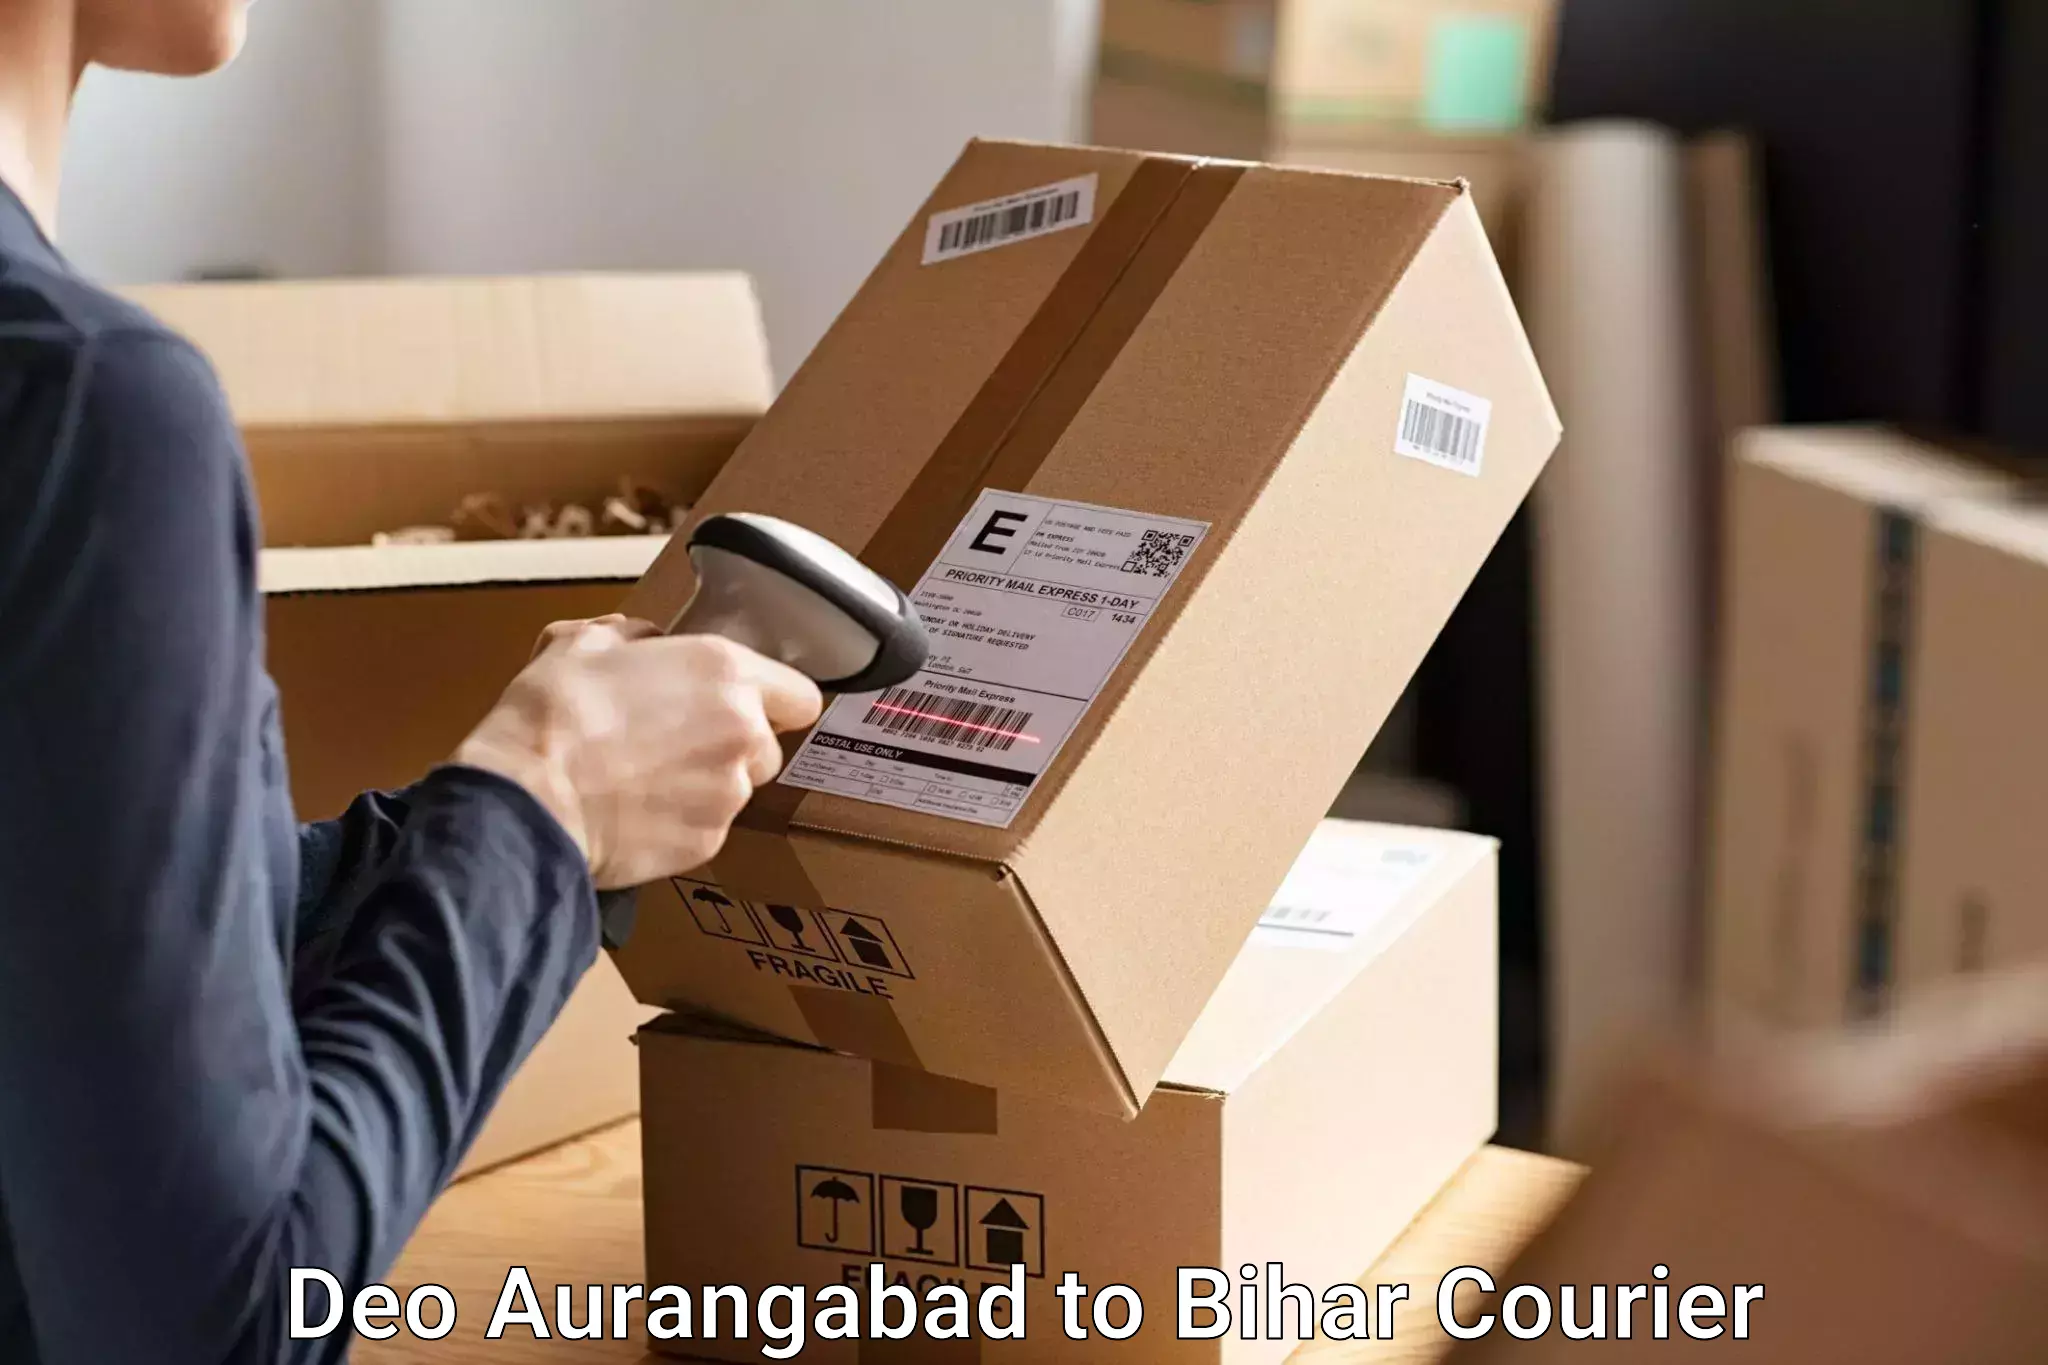 Baggage delivery technology Deo Aurangabad to Bihta